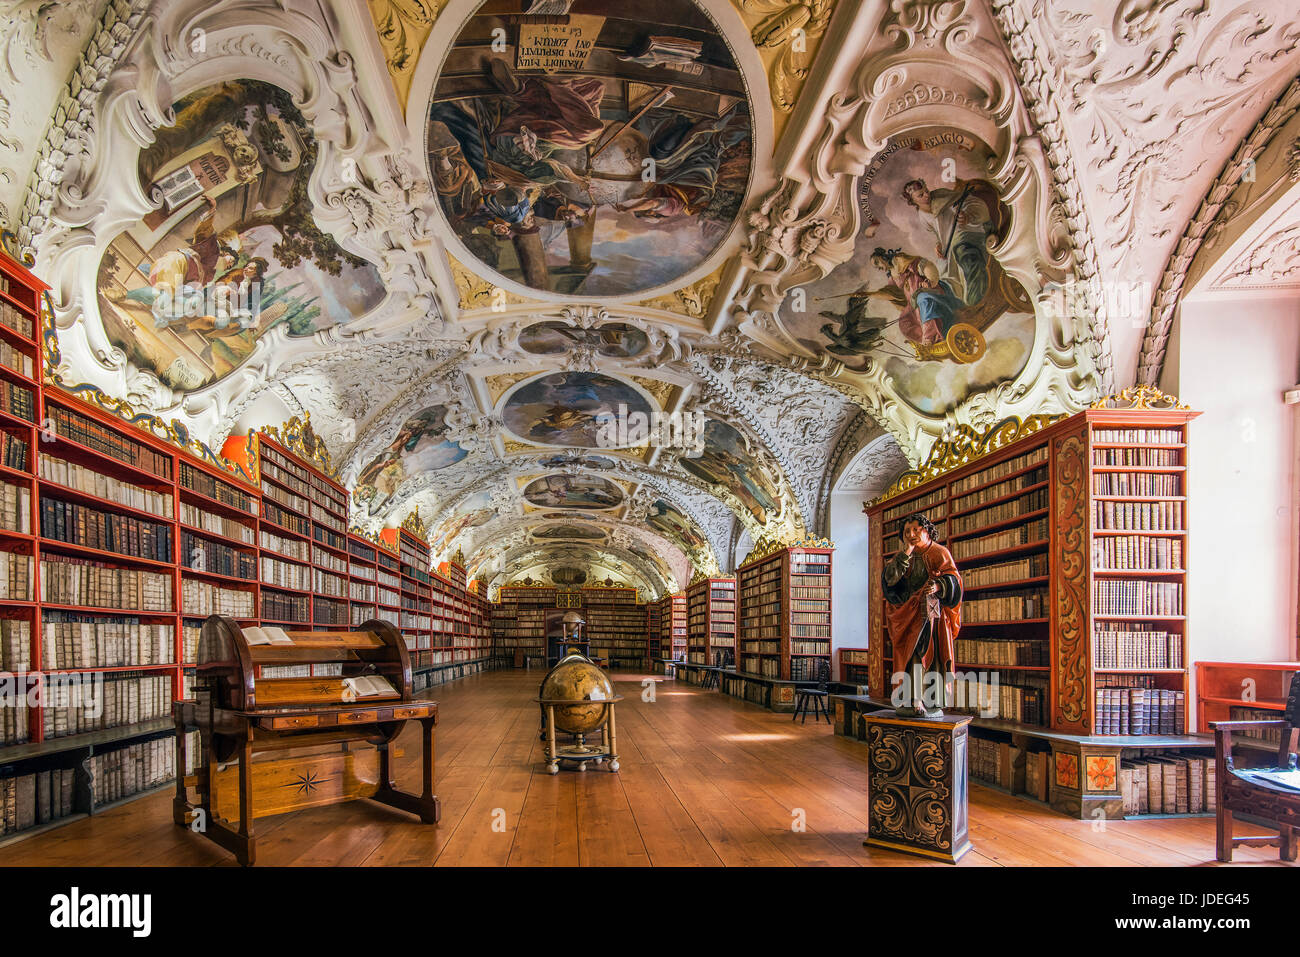 The Theological Hall with library and stucco decoration and paintings dated from 1720s, Strahov Monastery, Prague, Bohemia, Czech Republic Stock Photo